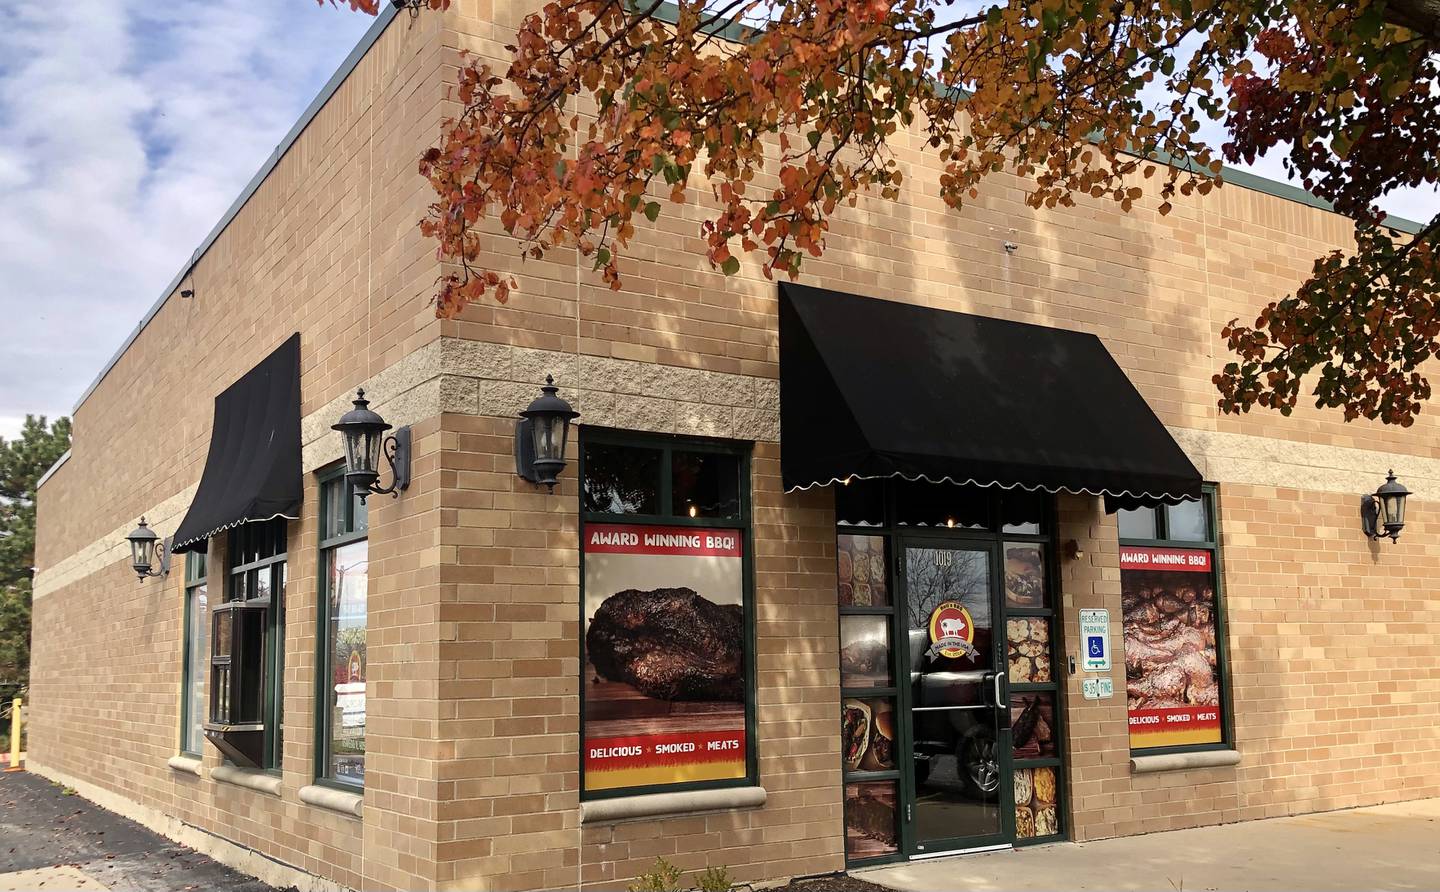 Hell's BBQ is planning a grand opening Nov. 11 2022, for their new location at 1019 Station Dr. in the Oswego Junction retail center near Venue 1012 at the northwest corner of Orchard Road and Mill Road.